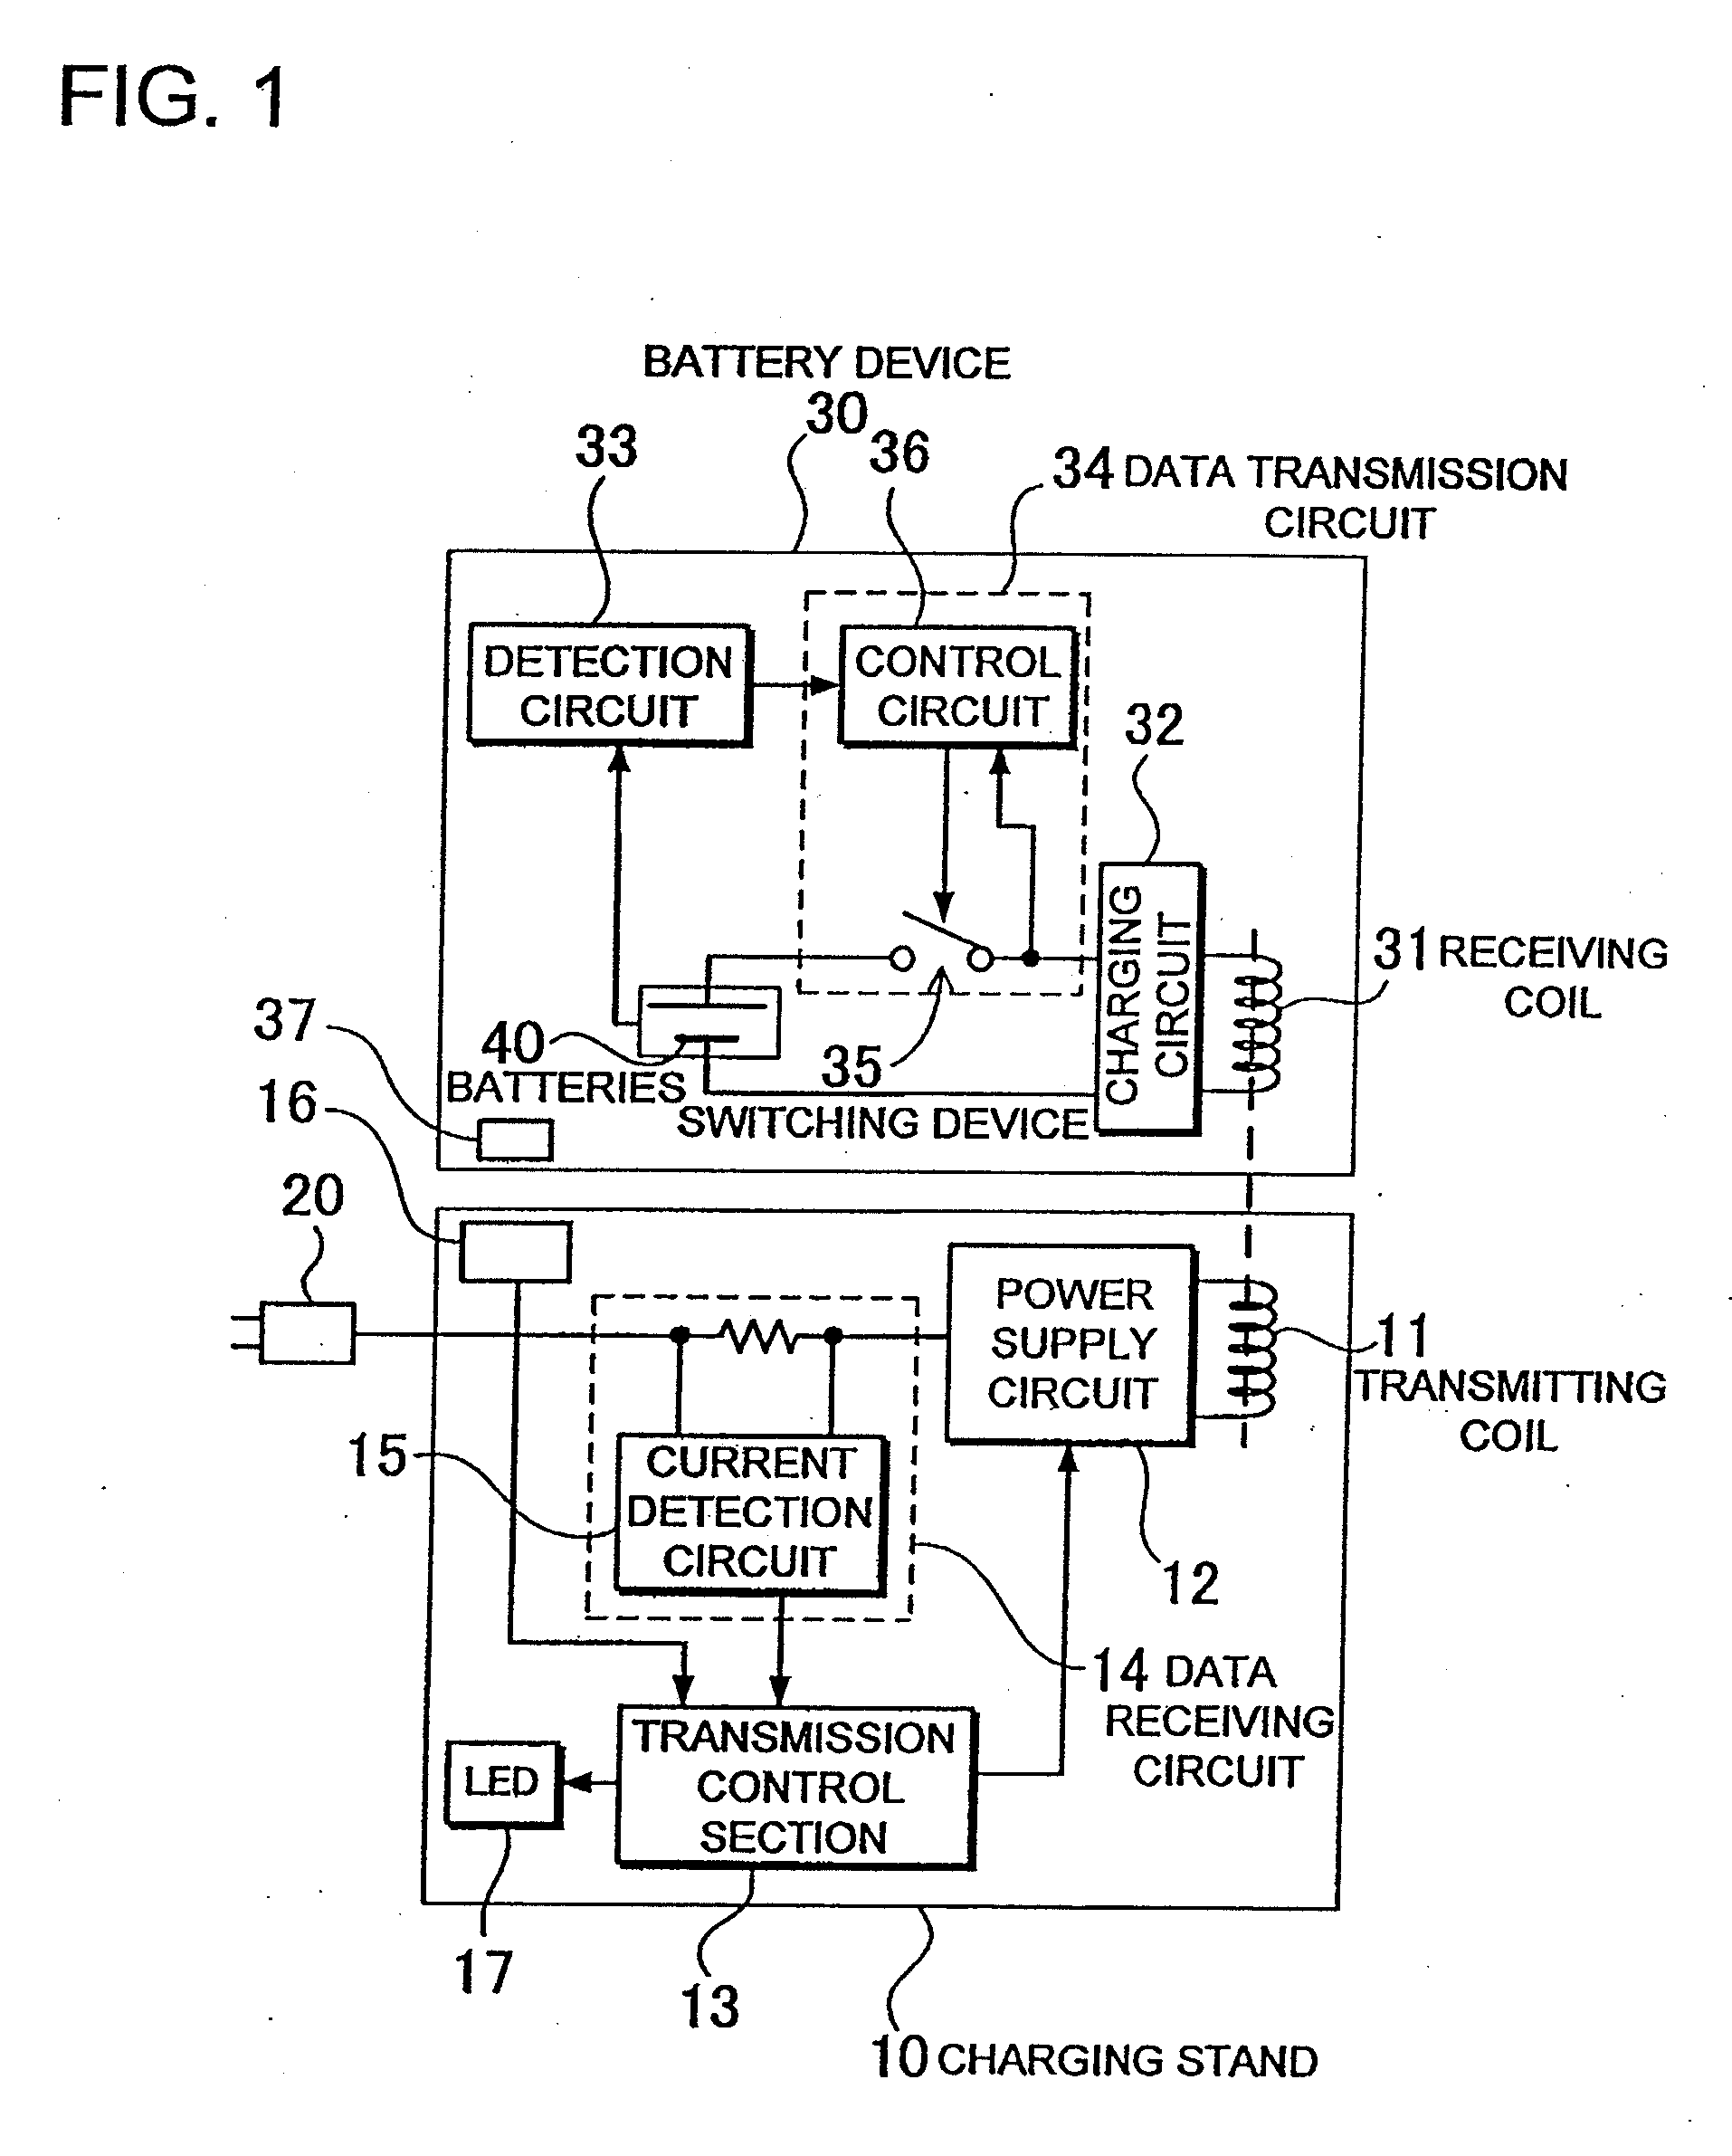 Method of data transmission embedded in electric power transmission, and a charging stand and battery device using that data transmission